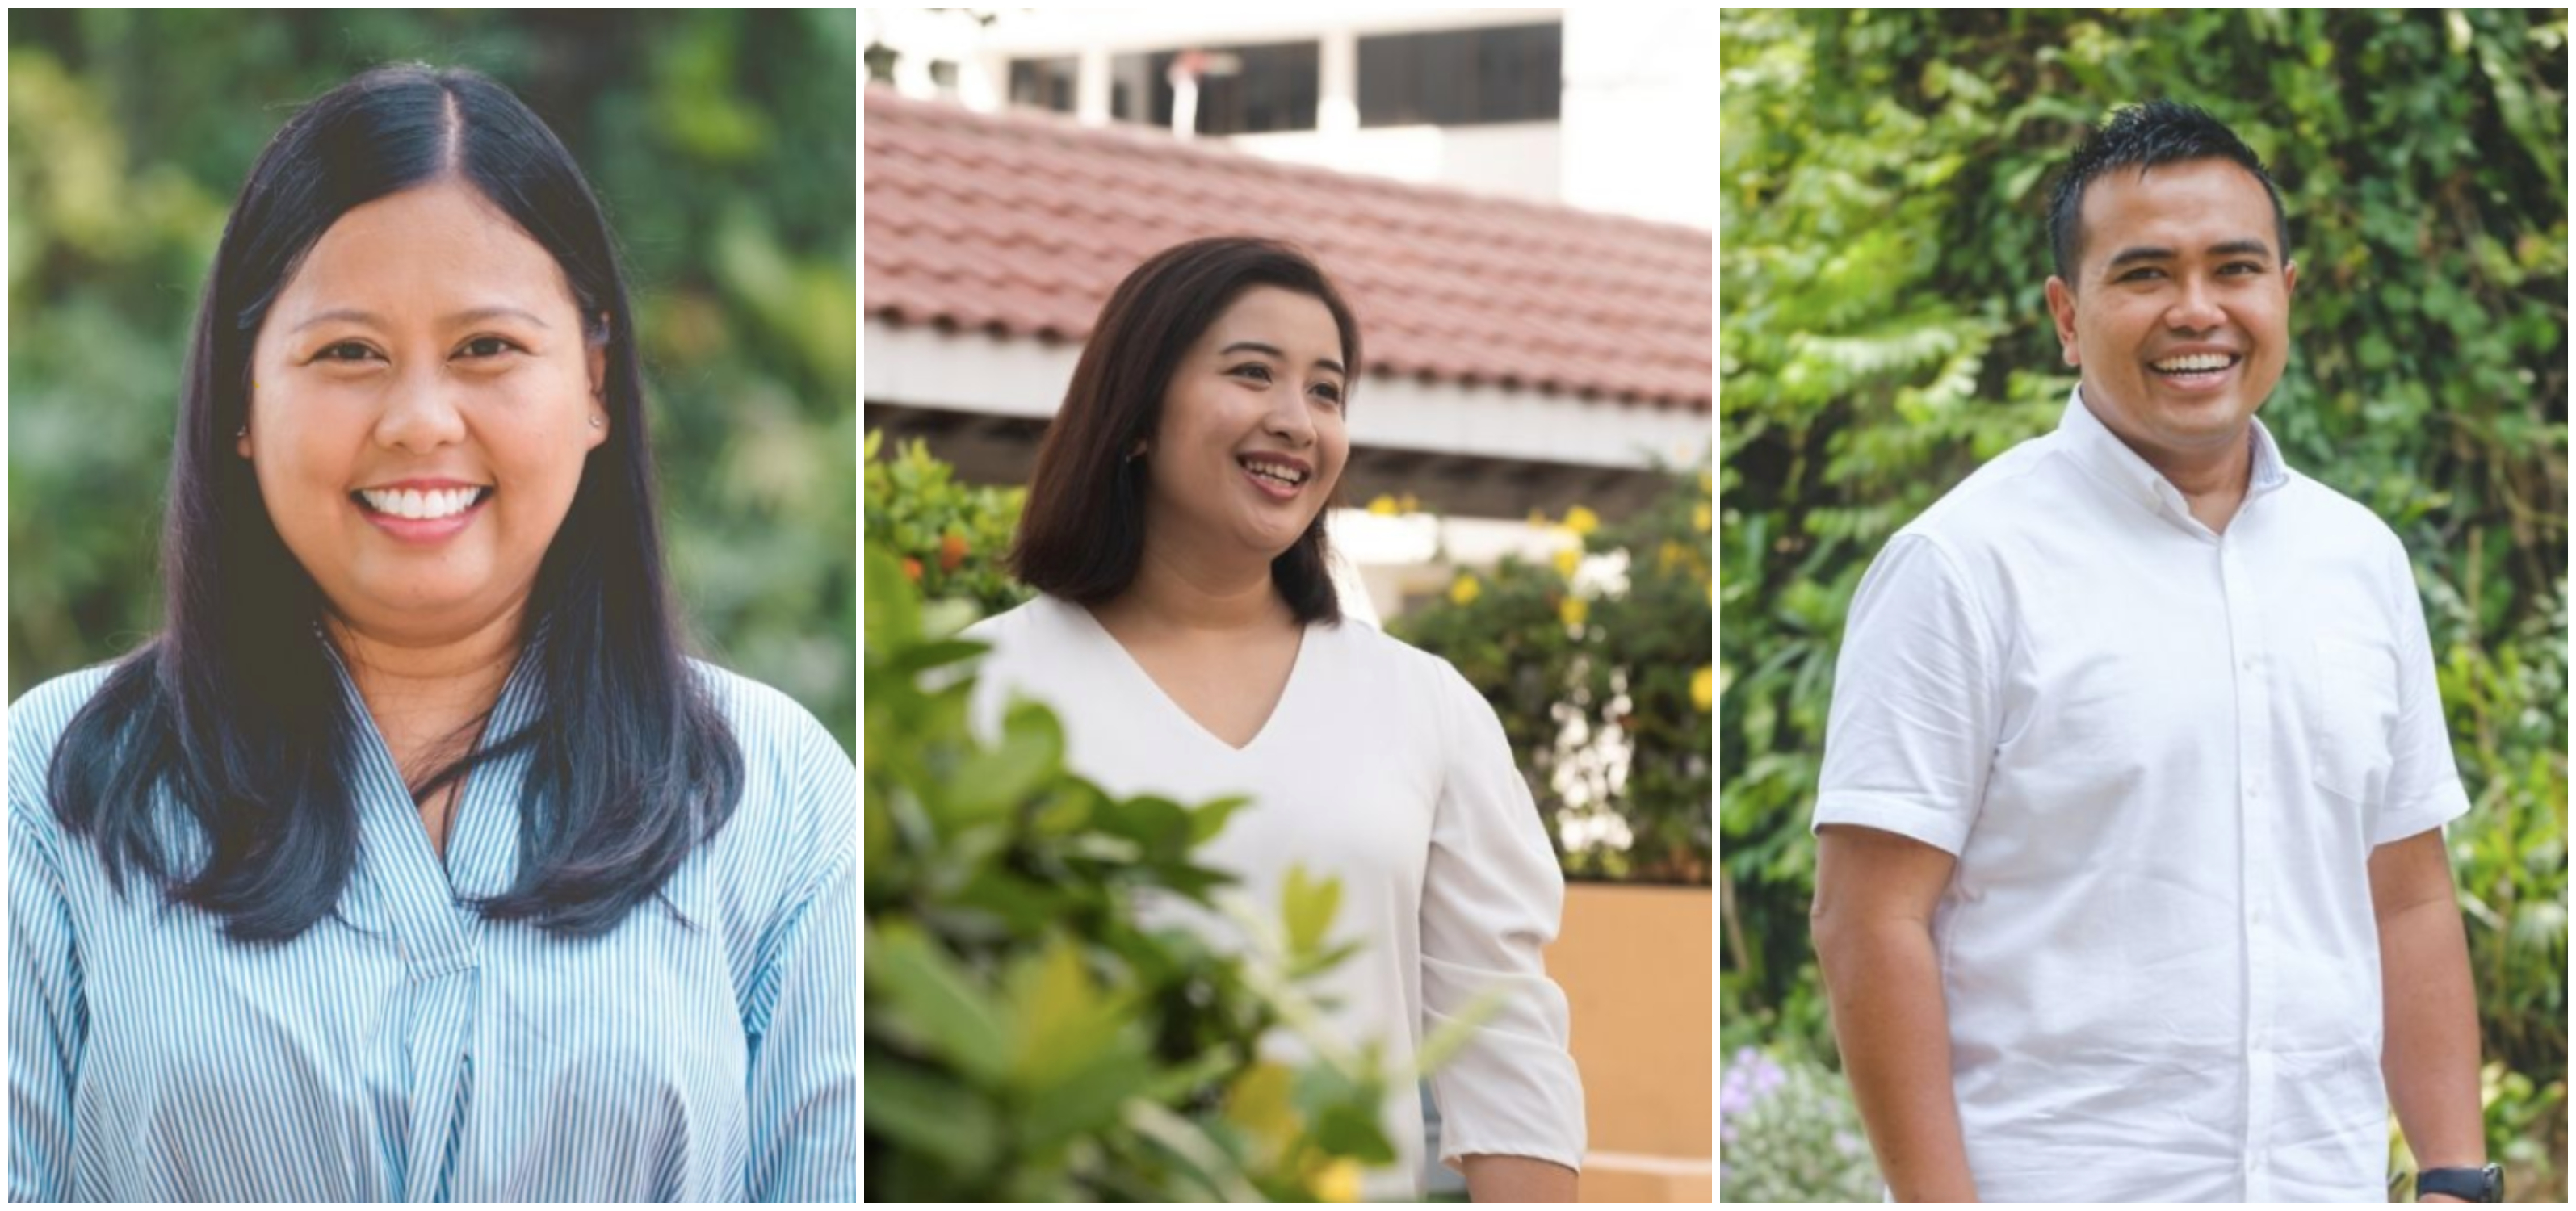 Is A Diverse Parliament Enough To Address Systemic Inequality? Minority Singaporeans Tell Us